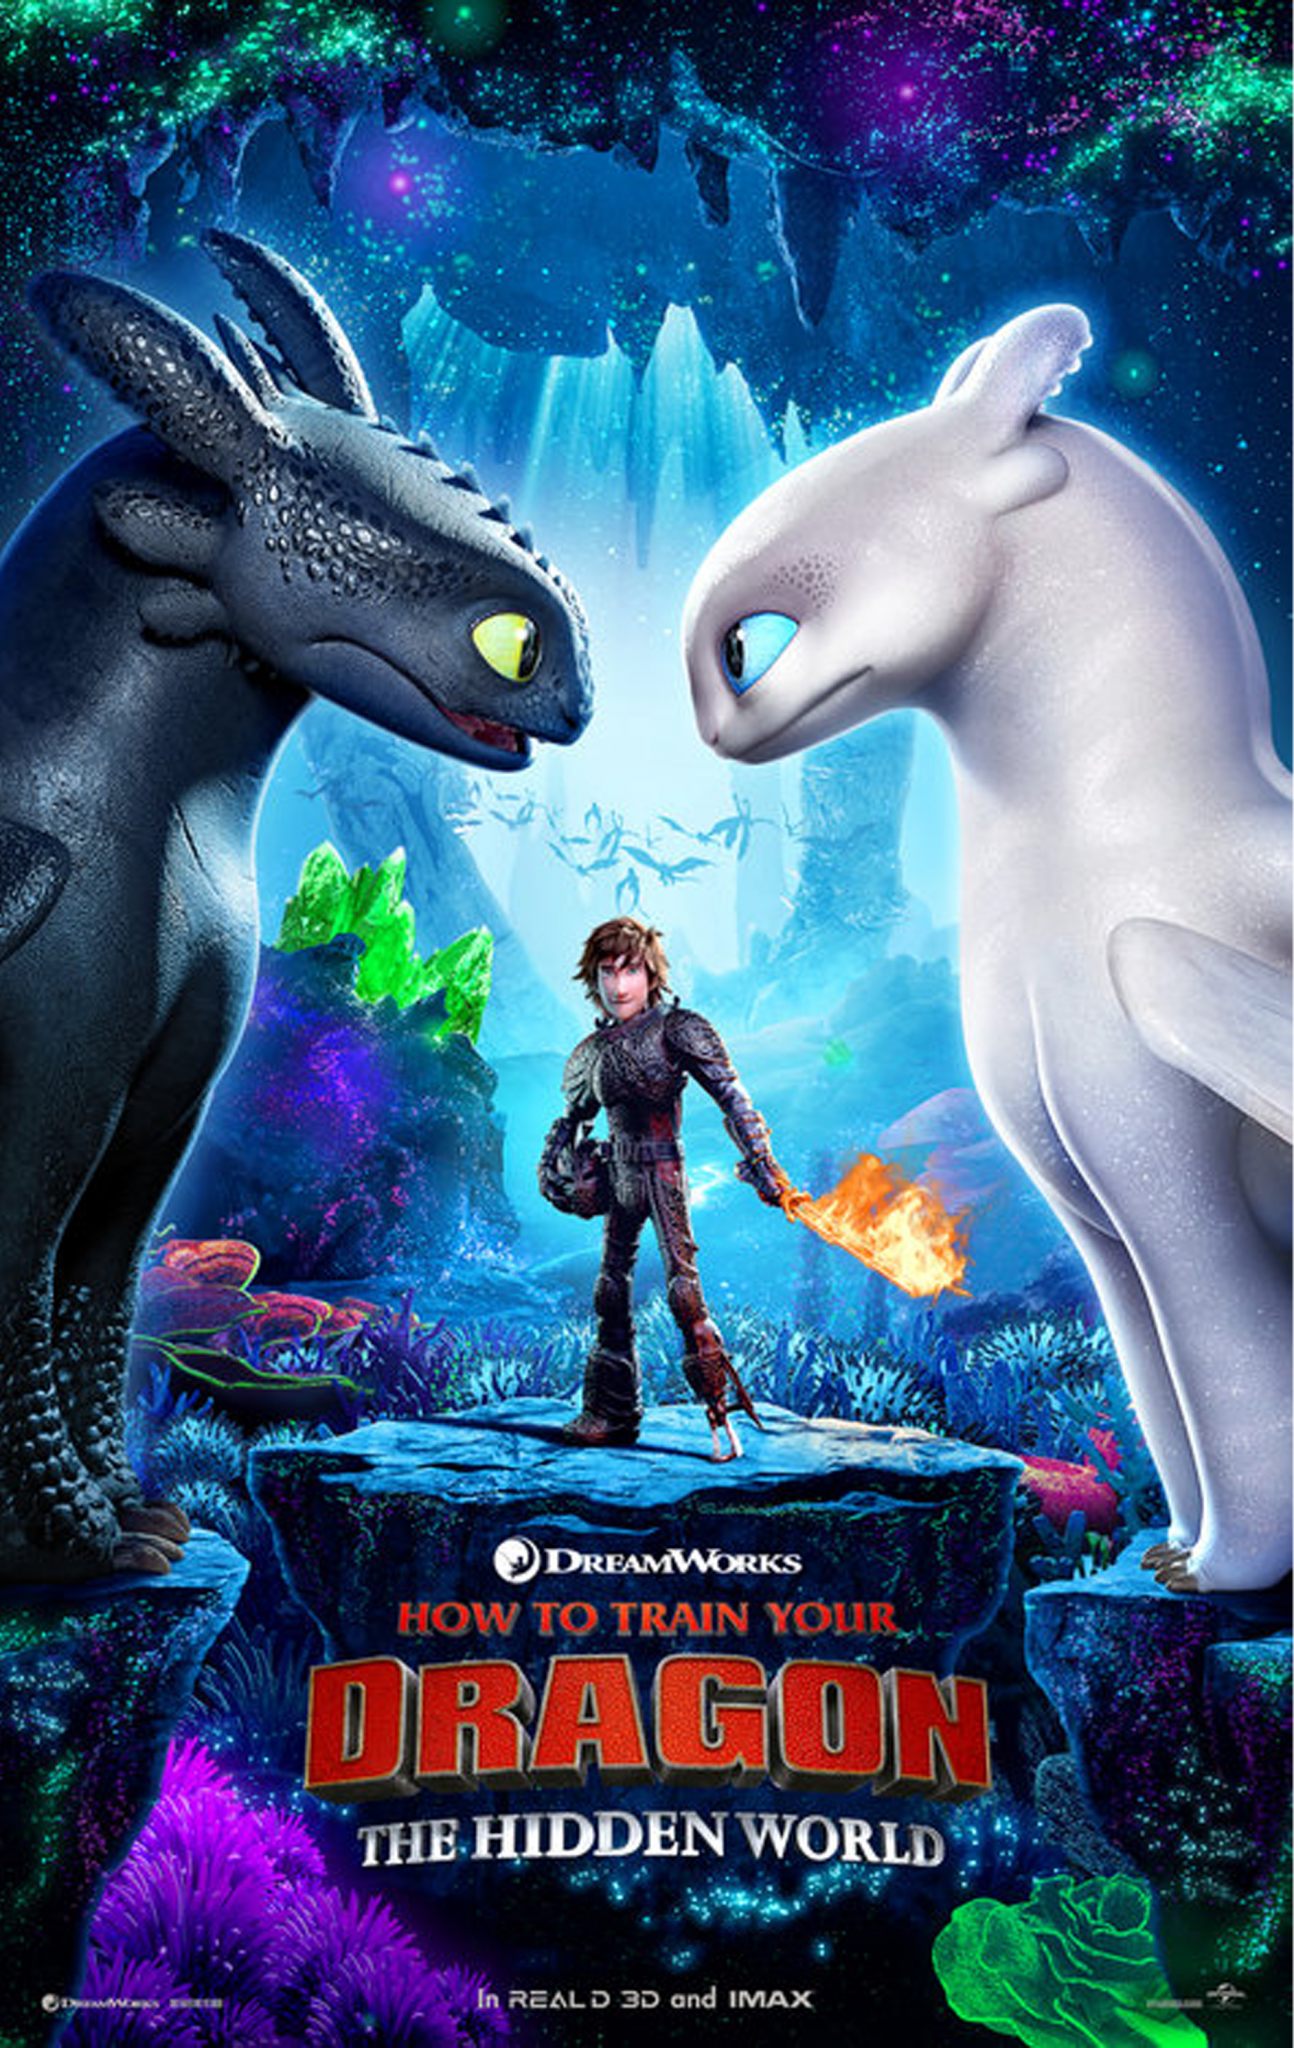 How To Train Your Dragon 2019 Wallpaper